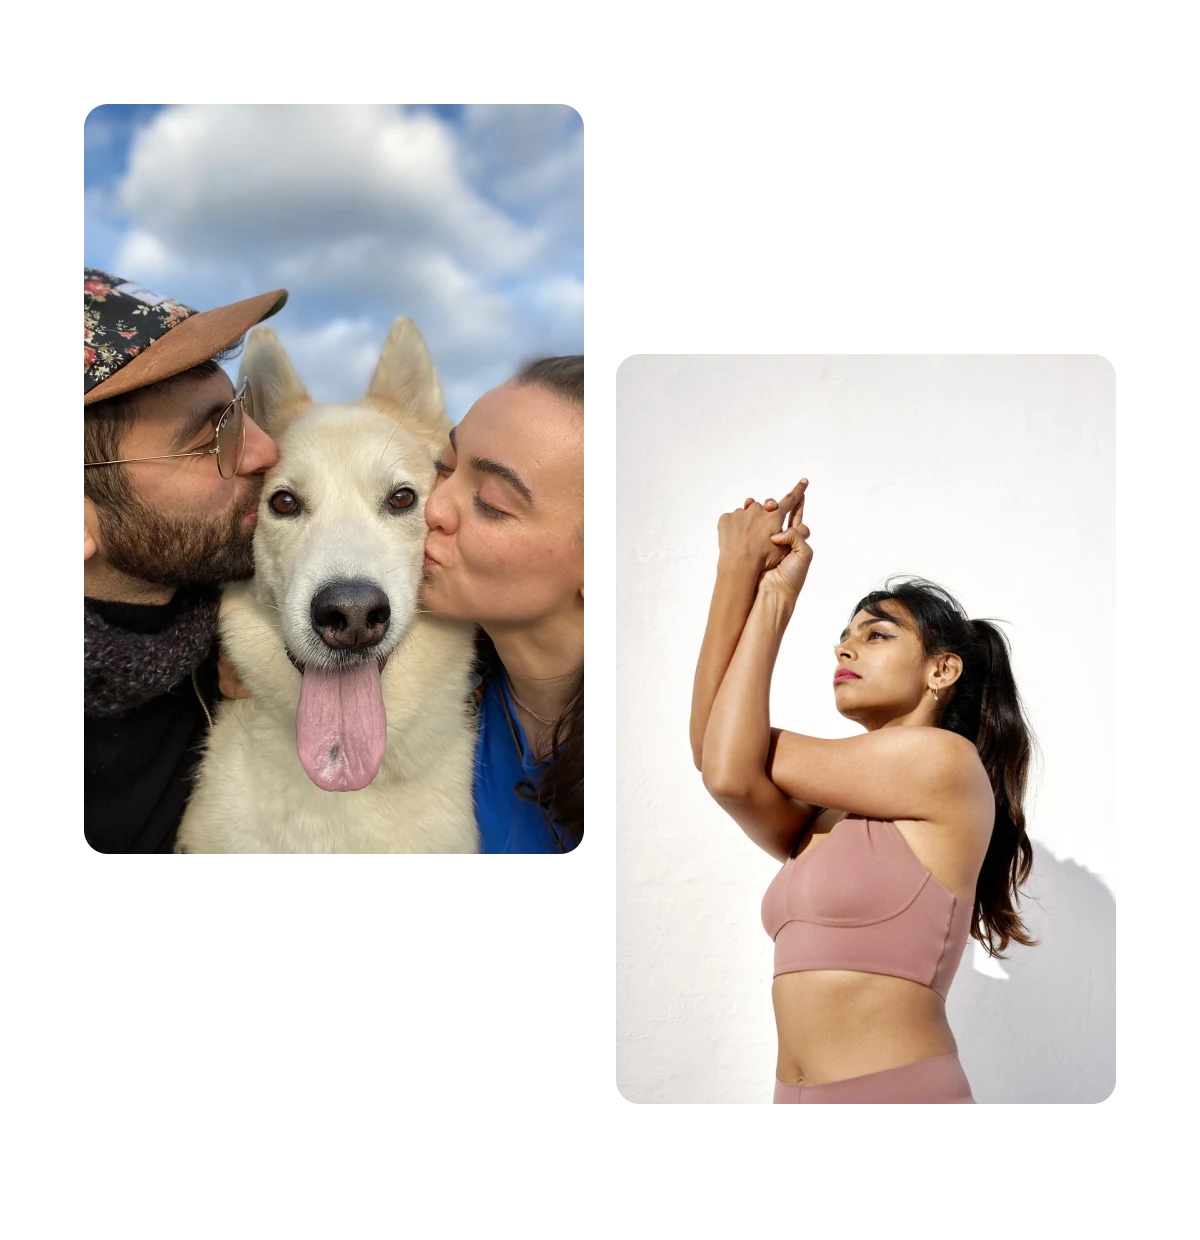 Two pins, couple kissing dog, woman in yoga pose